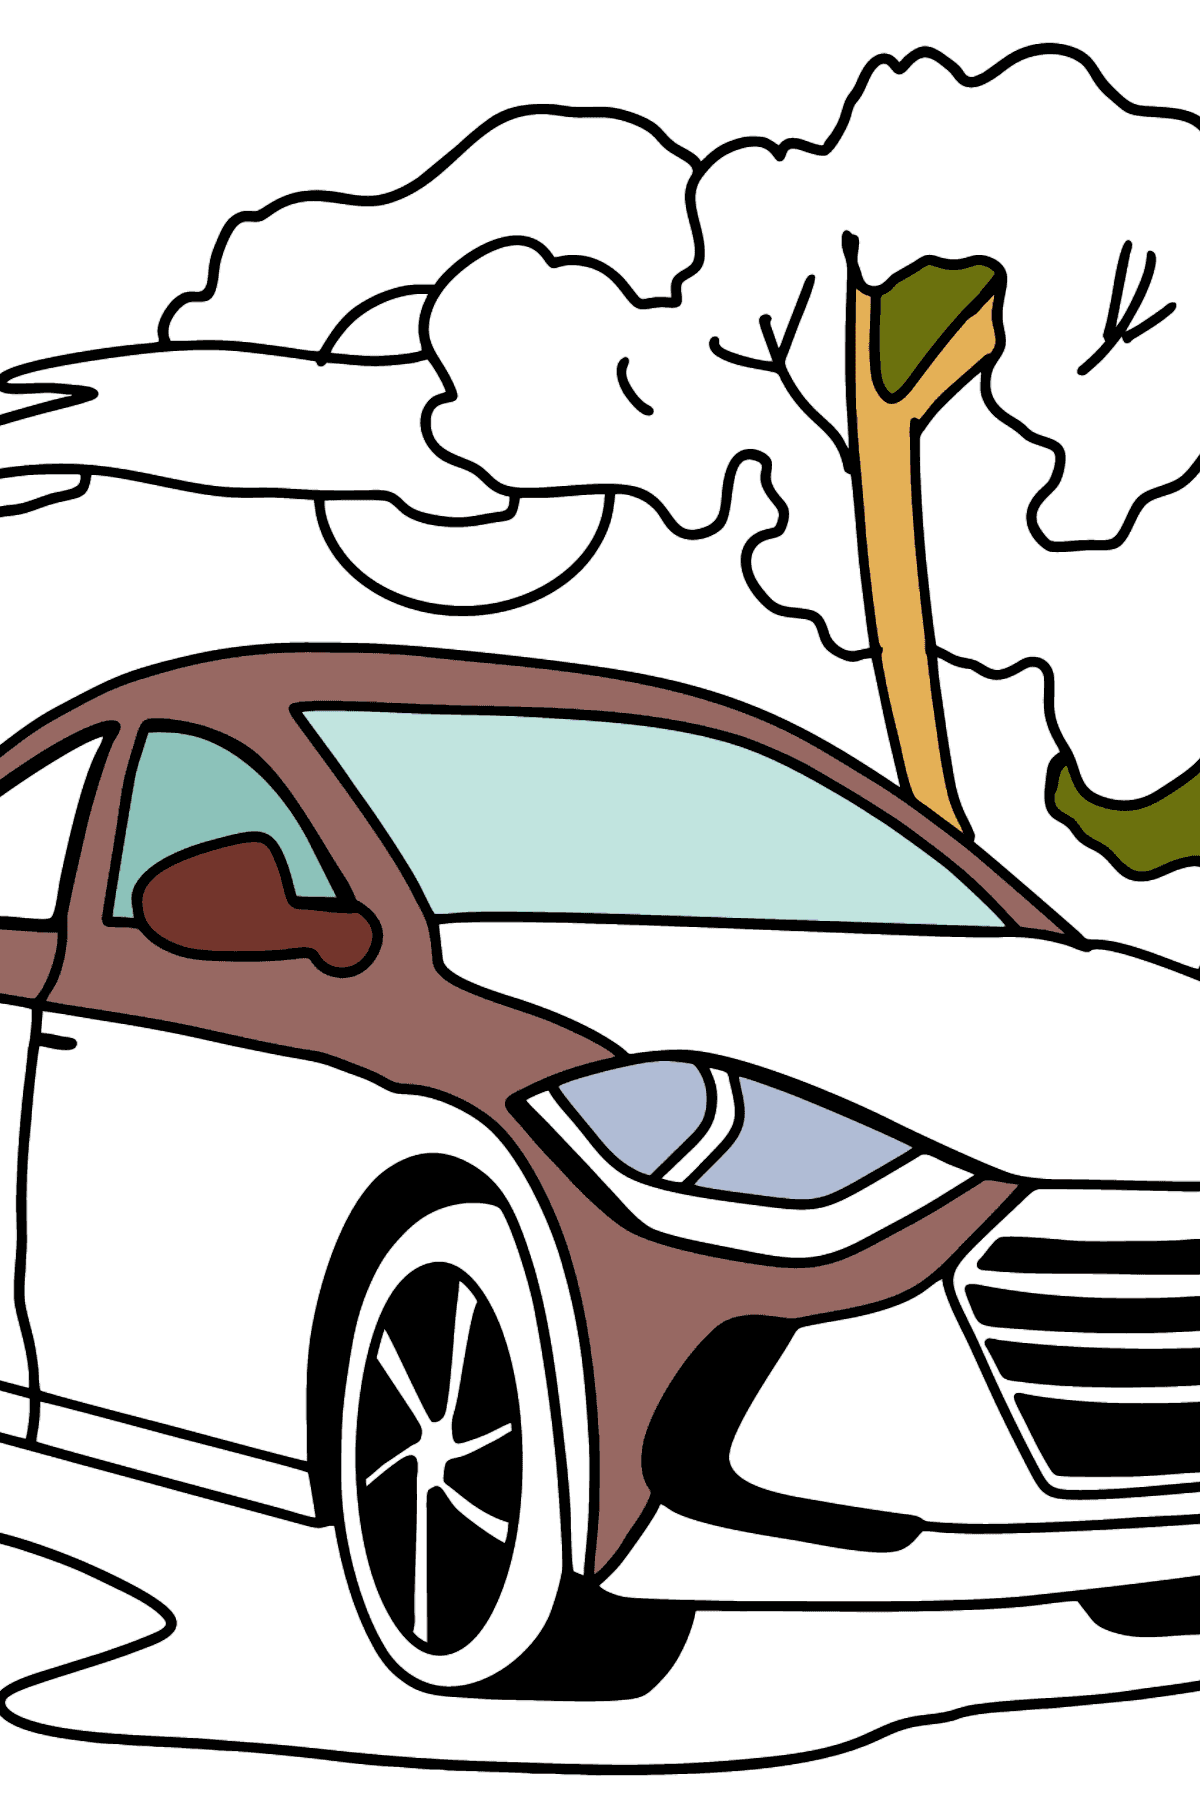 Hyundai car coloring page - Coloring Pages for Kids